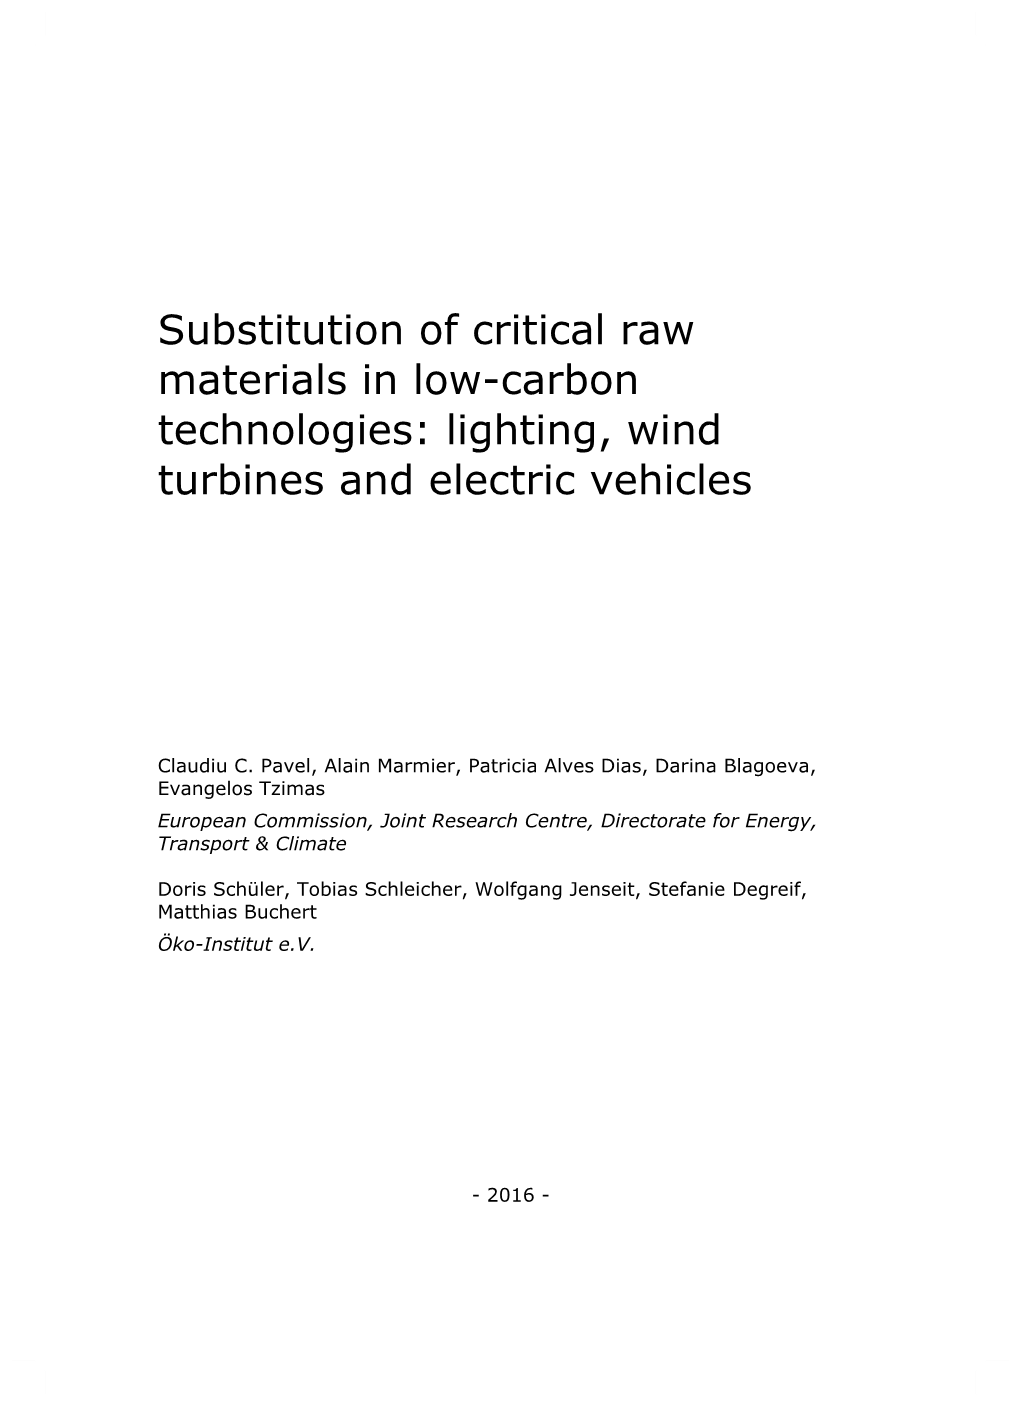 Substitution of Critical Raw Materials in Low-Carbon Technologies: Lighting, Wind Turbines and Electric Vehicles